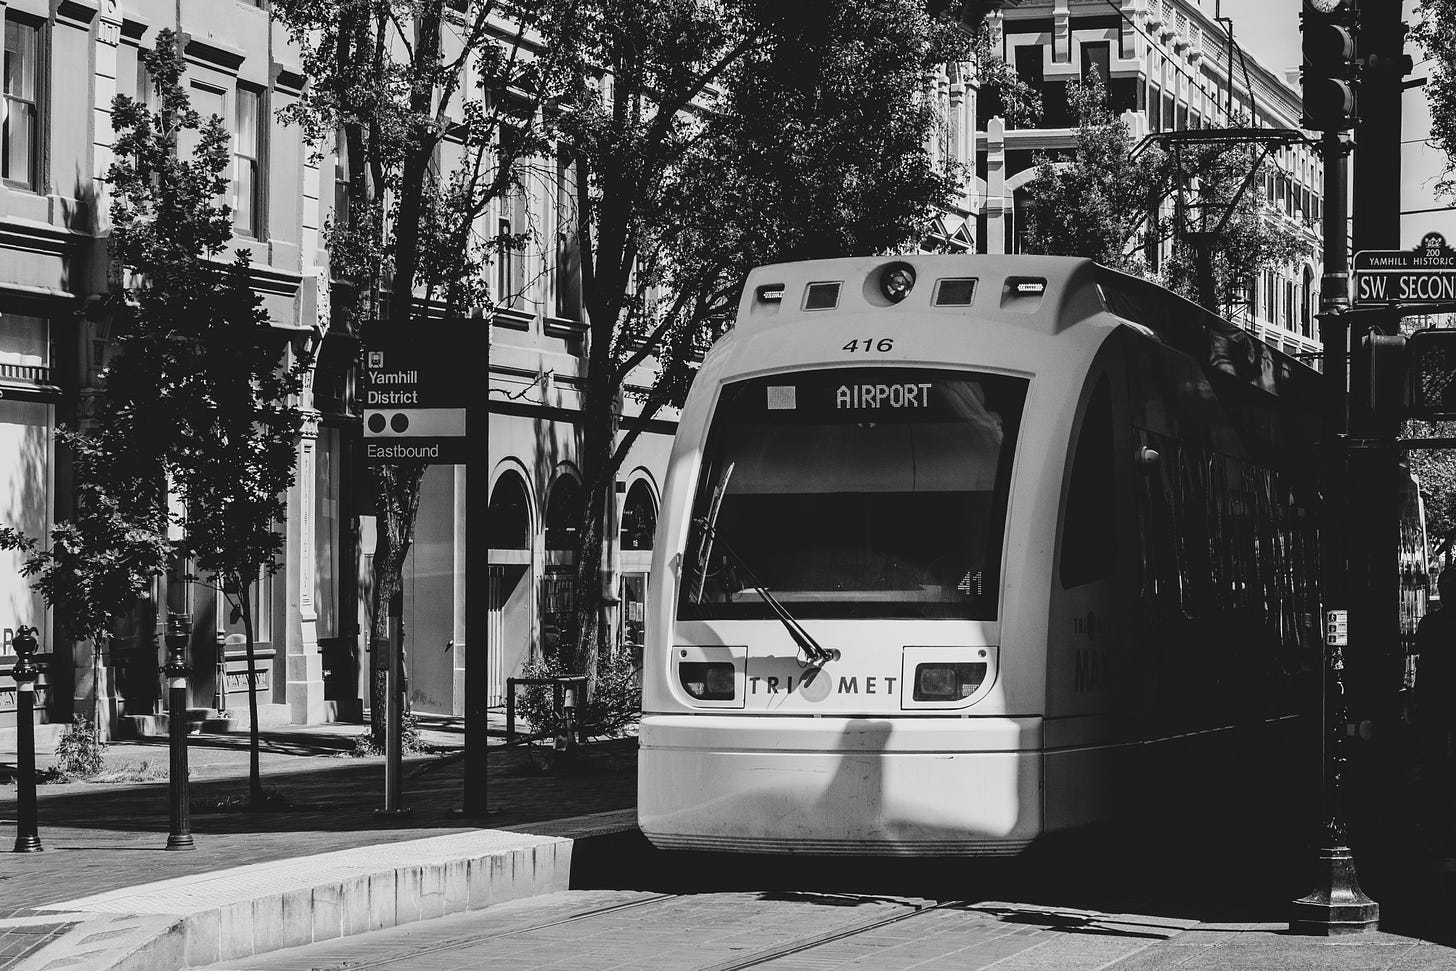 Image of the light rail in downtown Portland